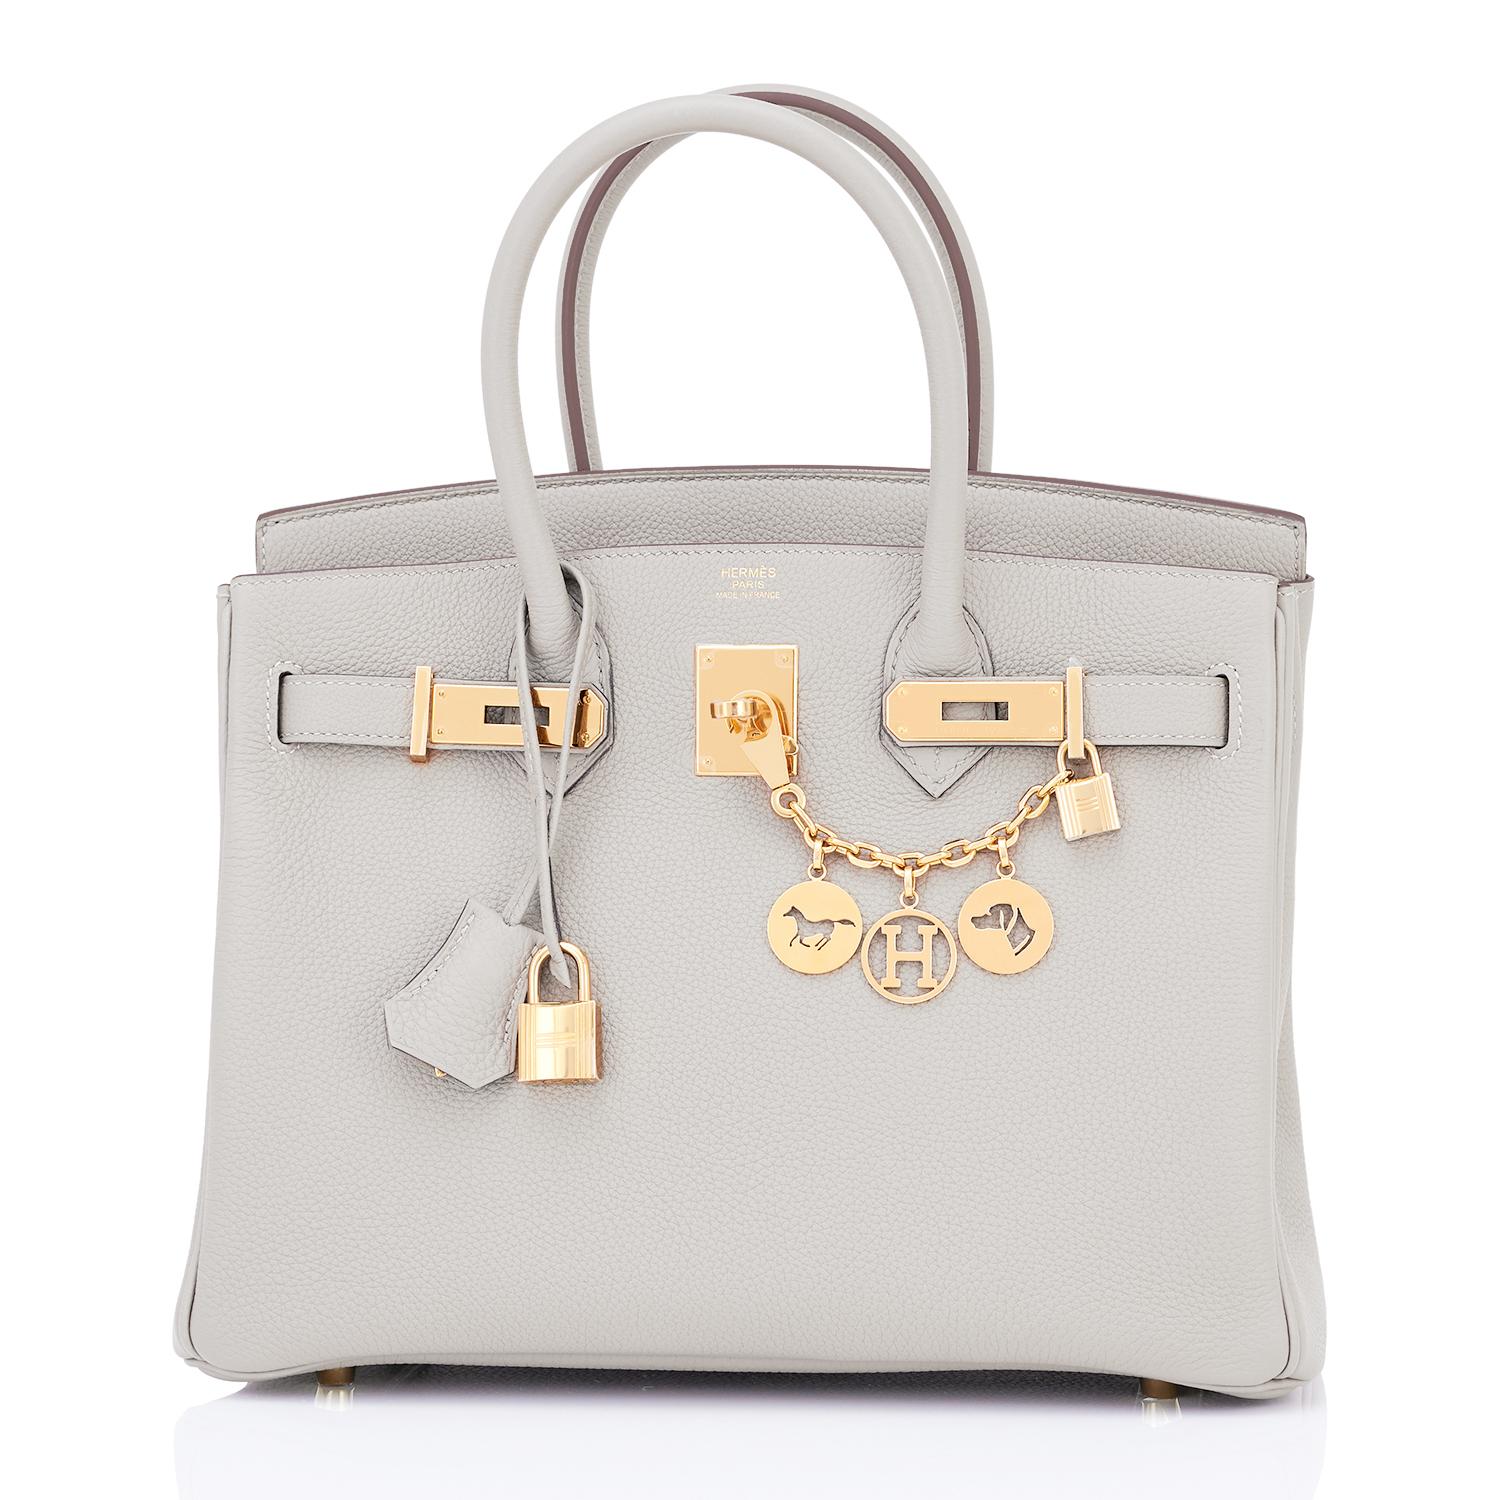 Guaranteed Authentic Hermes Birkin 30cm Gris Perle Togo Bag Gold Hardware Pearl Gray Y Stamp, 2020
Just purchased from Hermes store; bag bears new interior 2020 Y Stamp.
Brand New in Box in Store Fresh, Pristine Condition (with plastic on